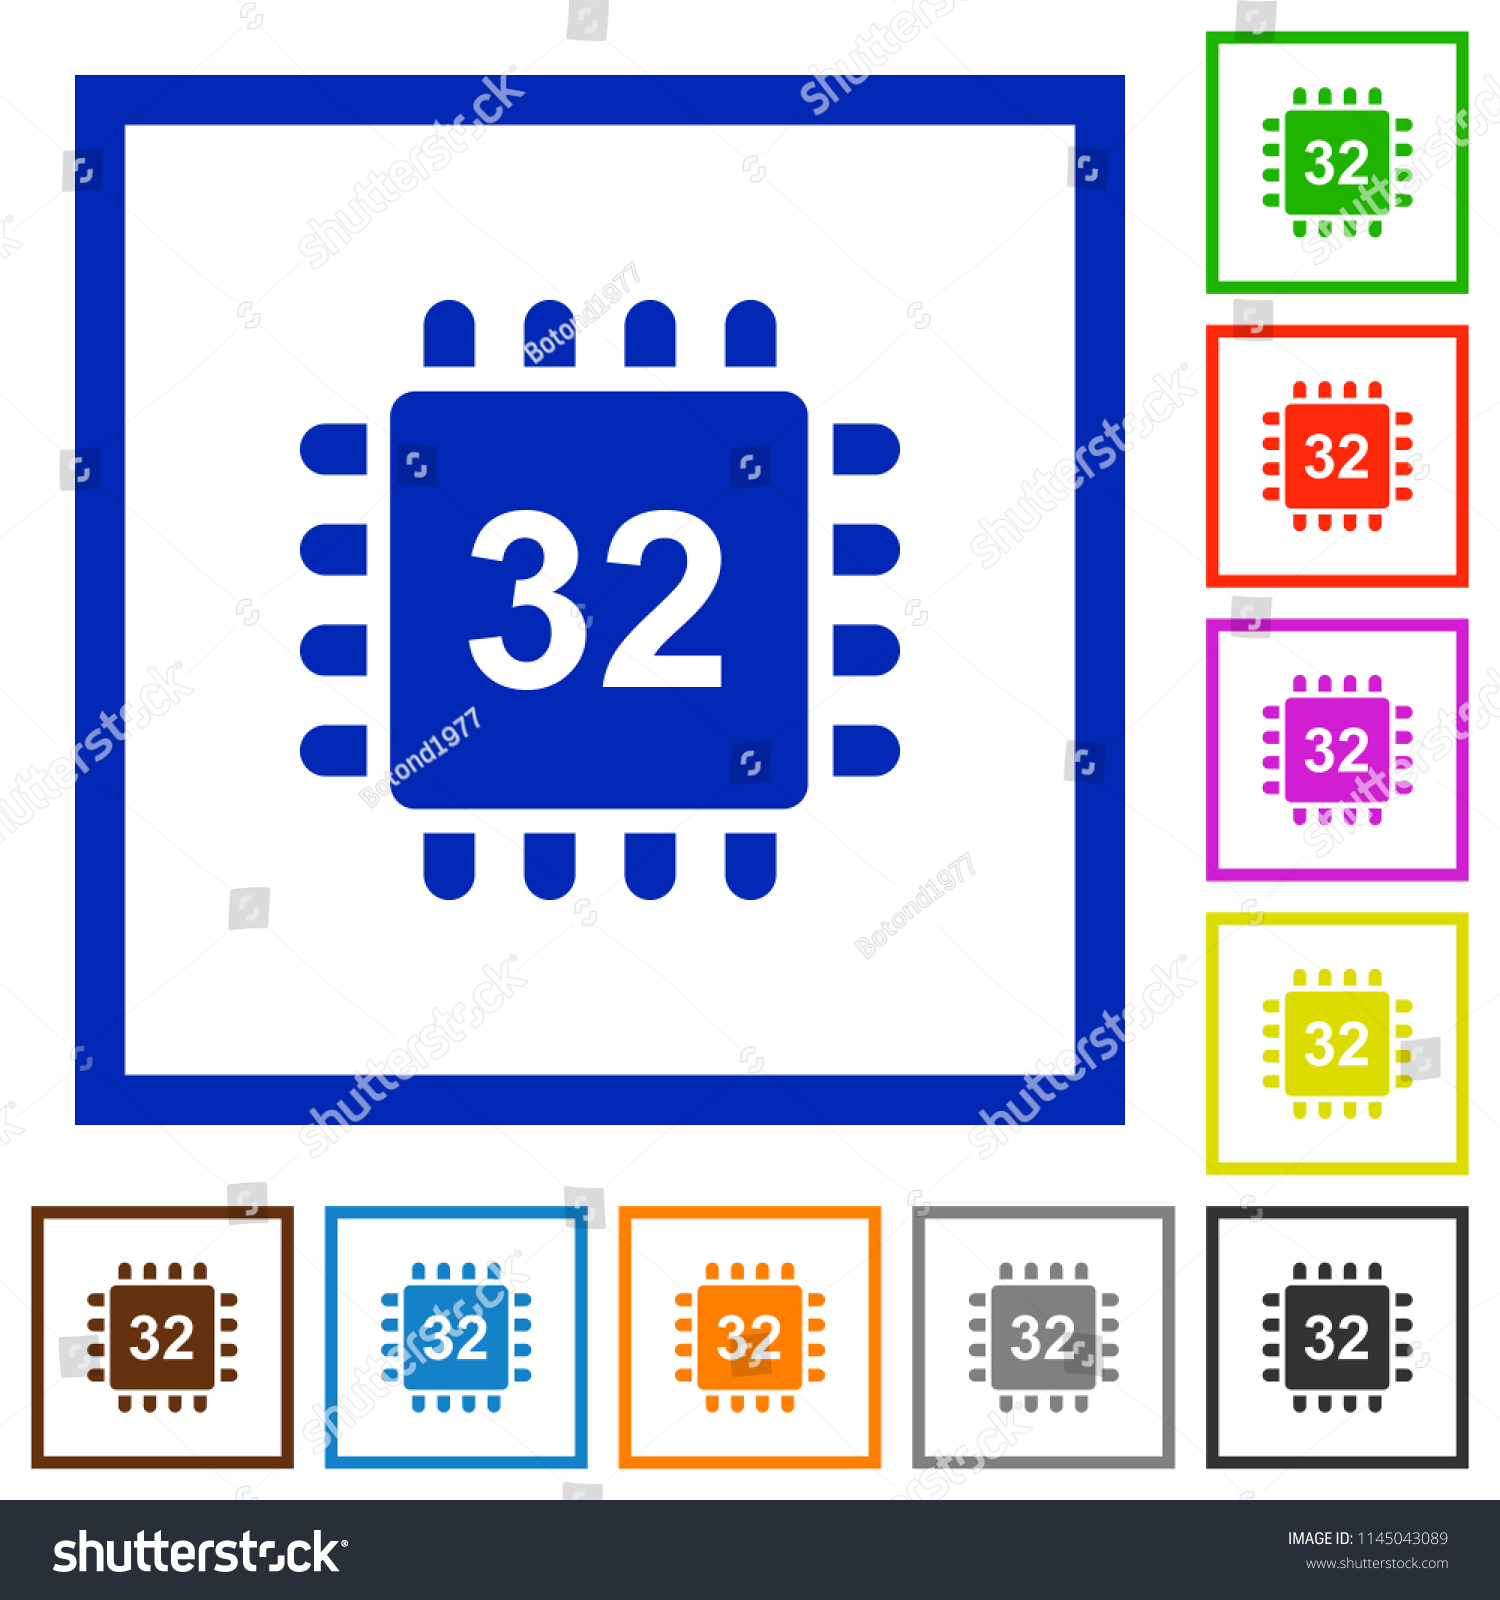 Microprocessor 32 bit architecture flat color icons in square frames on white background #1145043089